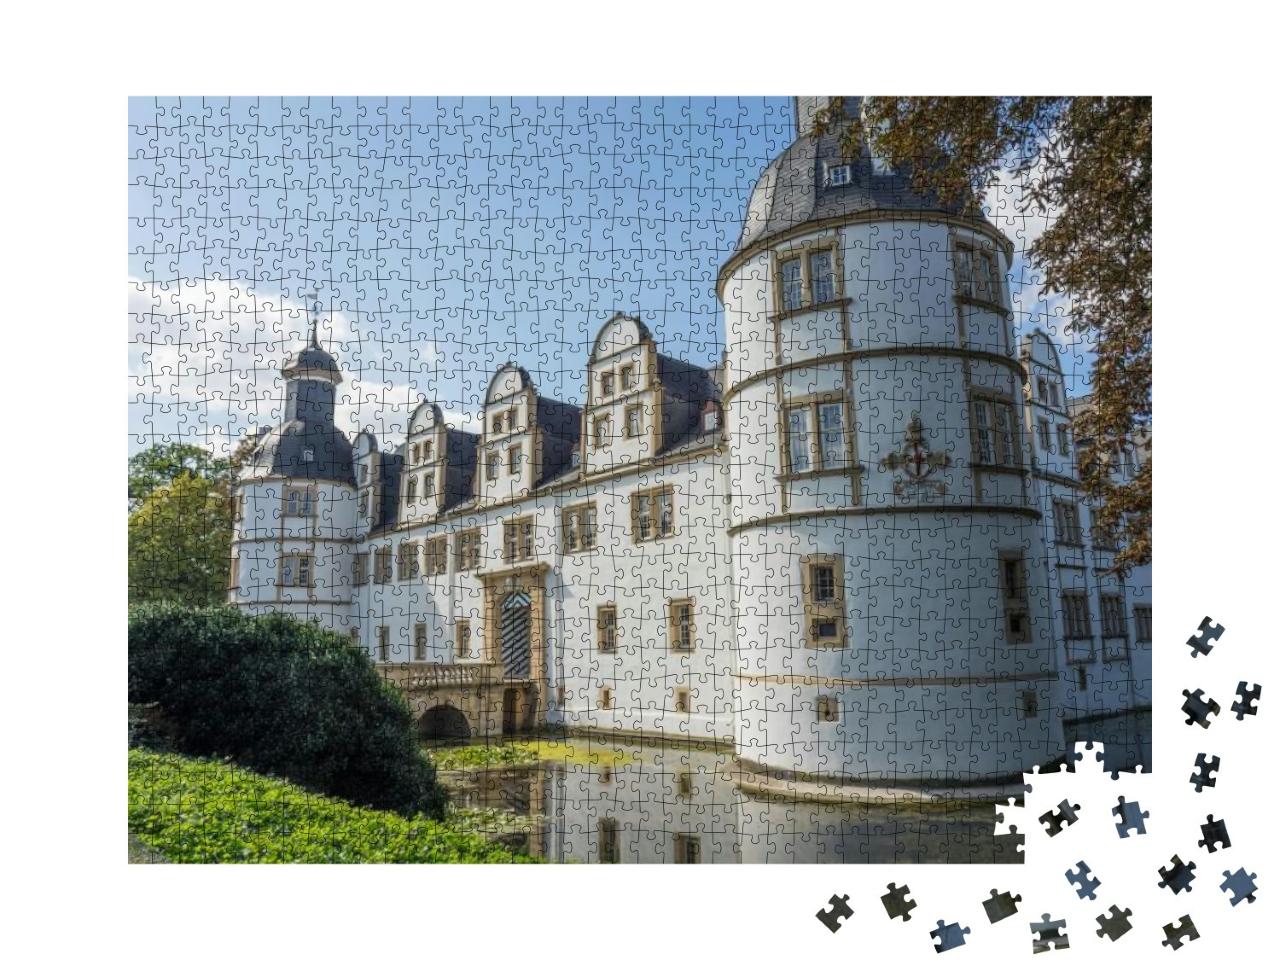 Puzzle 1000 Teile „Schloss in Paderborn“